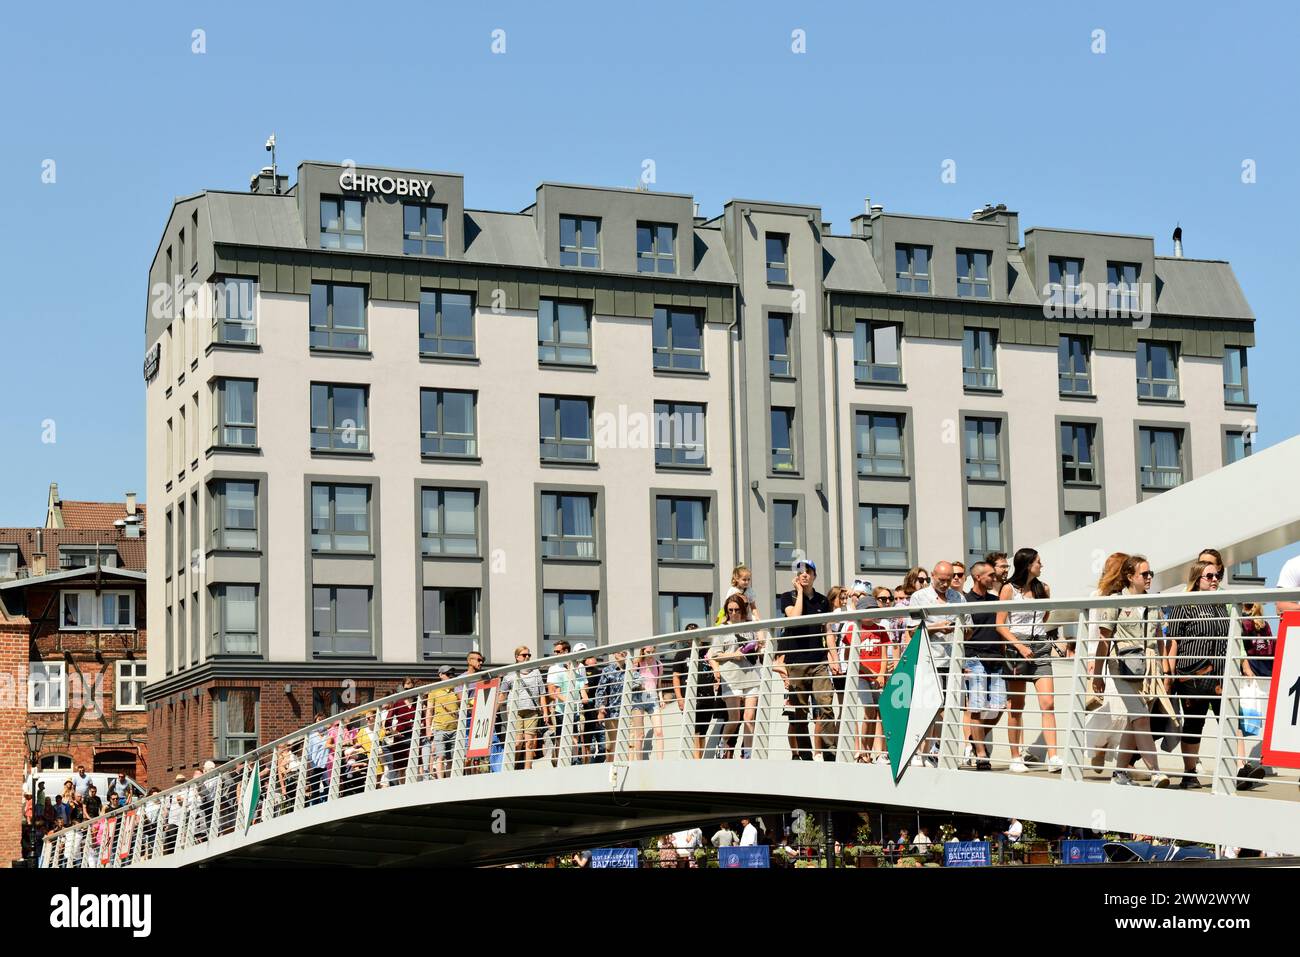 People on Wartka Bridge crossing over Motlawa River by the Chrobry Aparthotel in the Old Town of Gdansk, Poland, Europe, EU Stock Photo